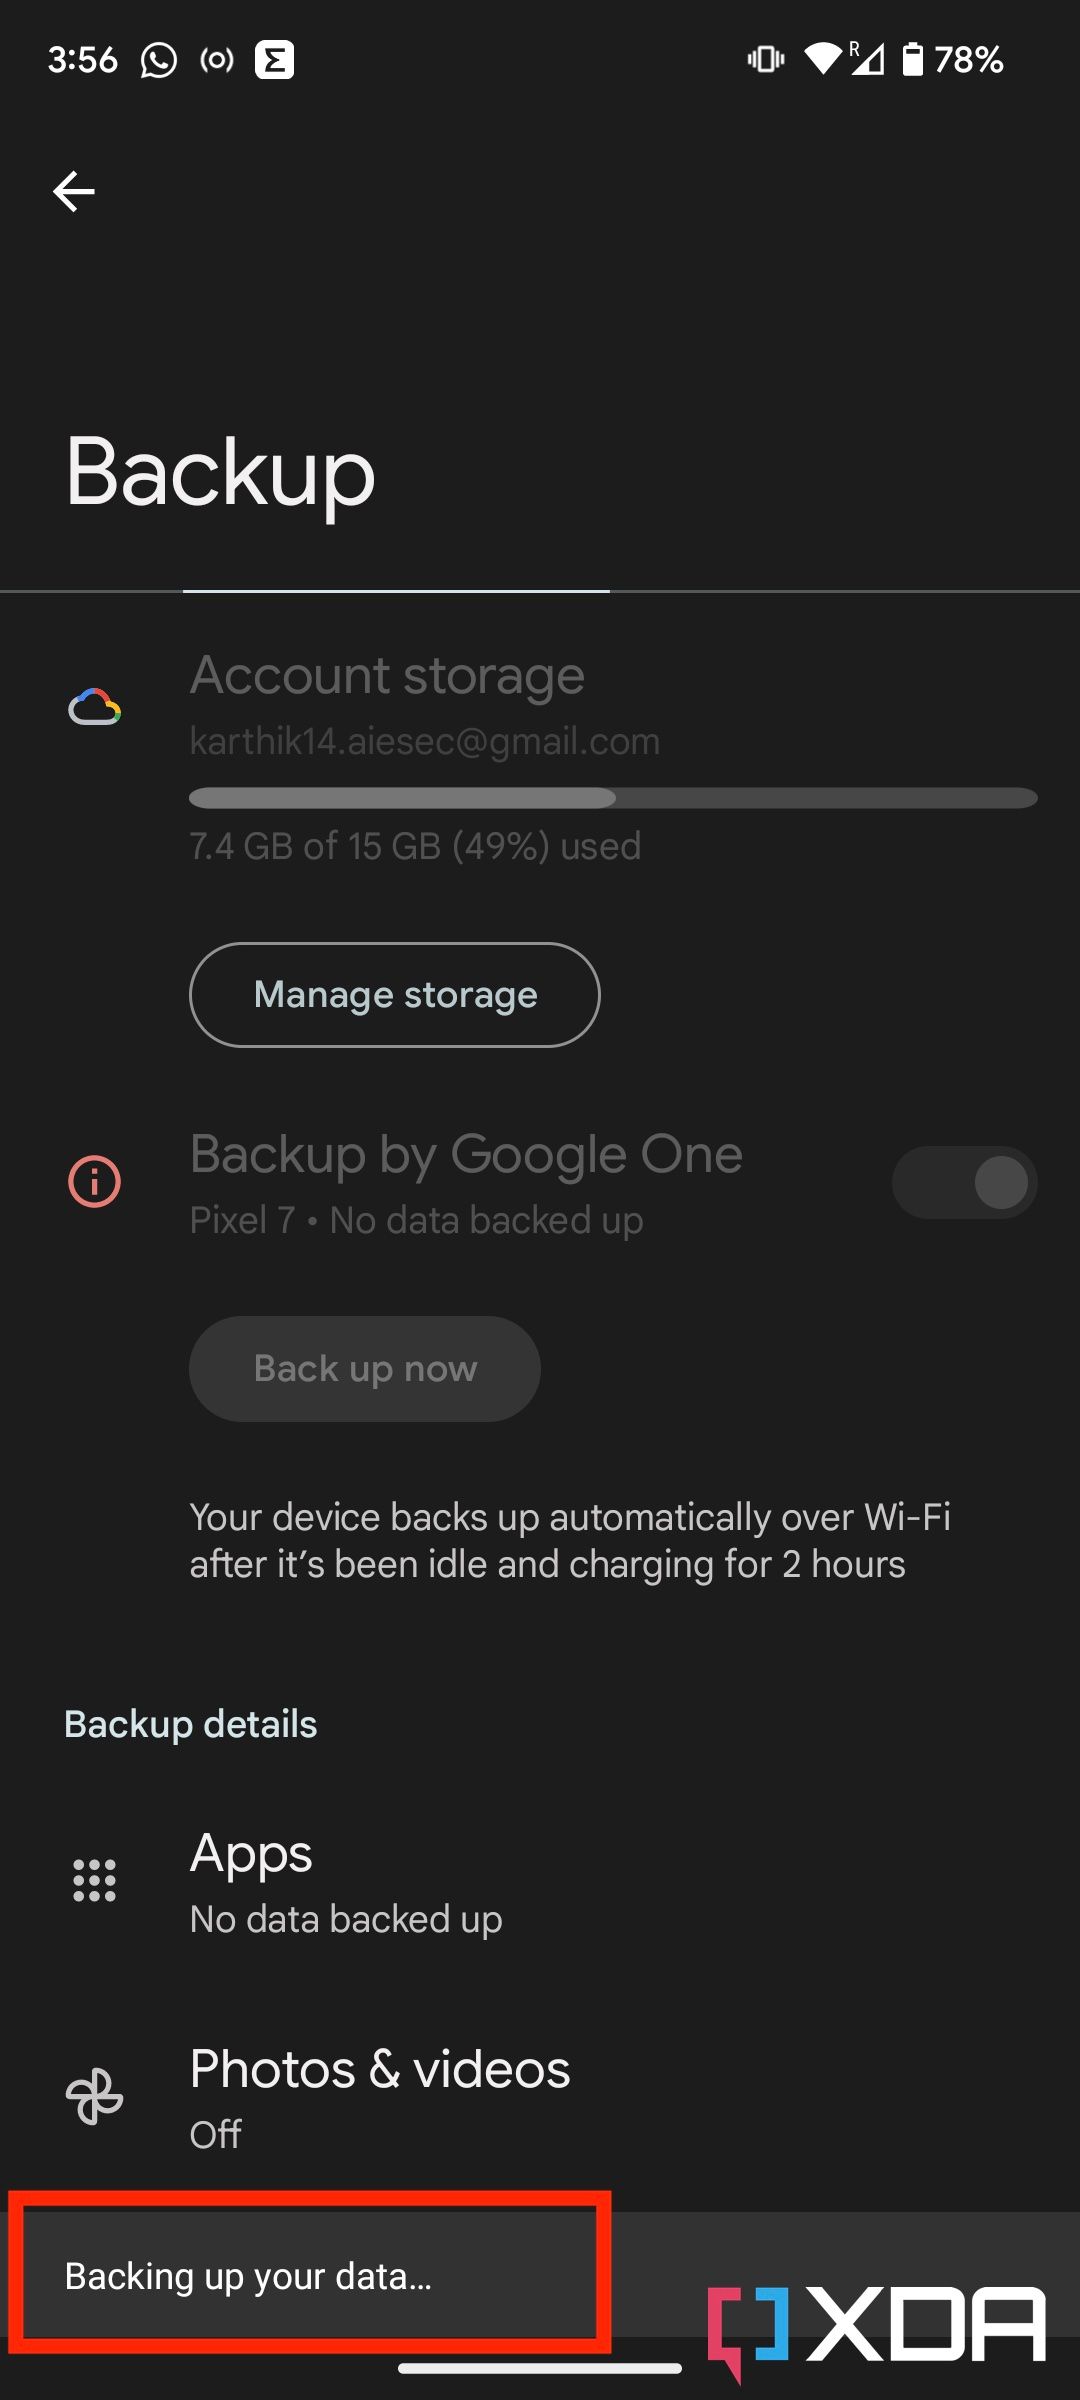 Backup progress page on Android 13